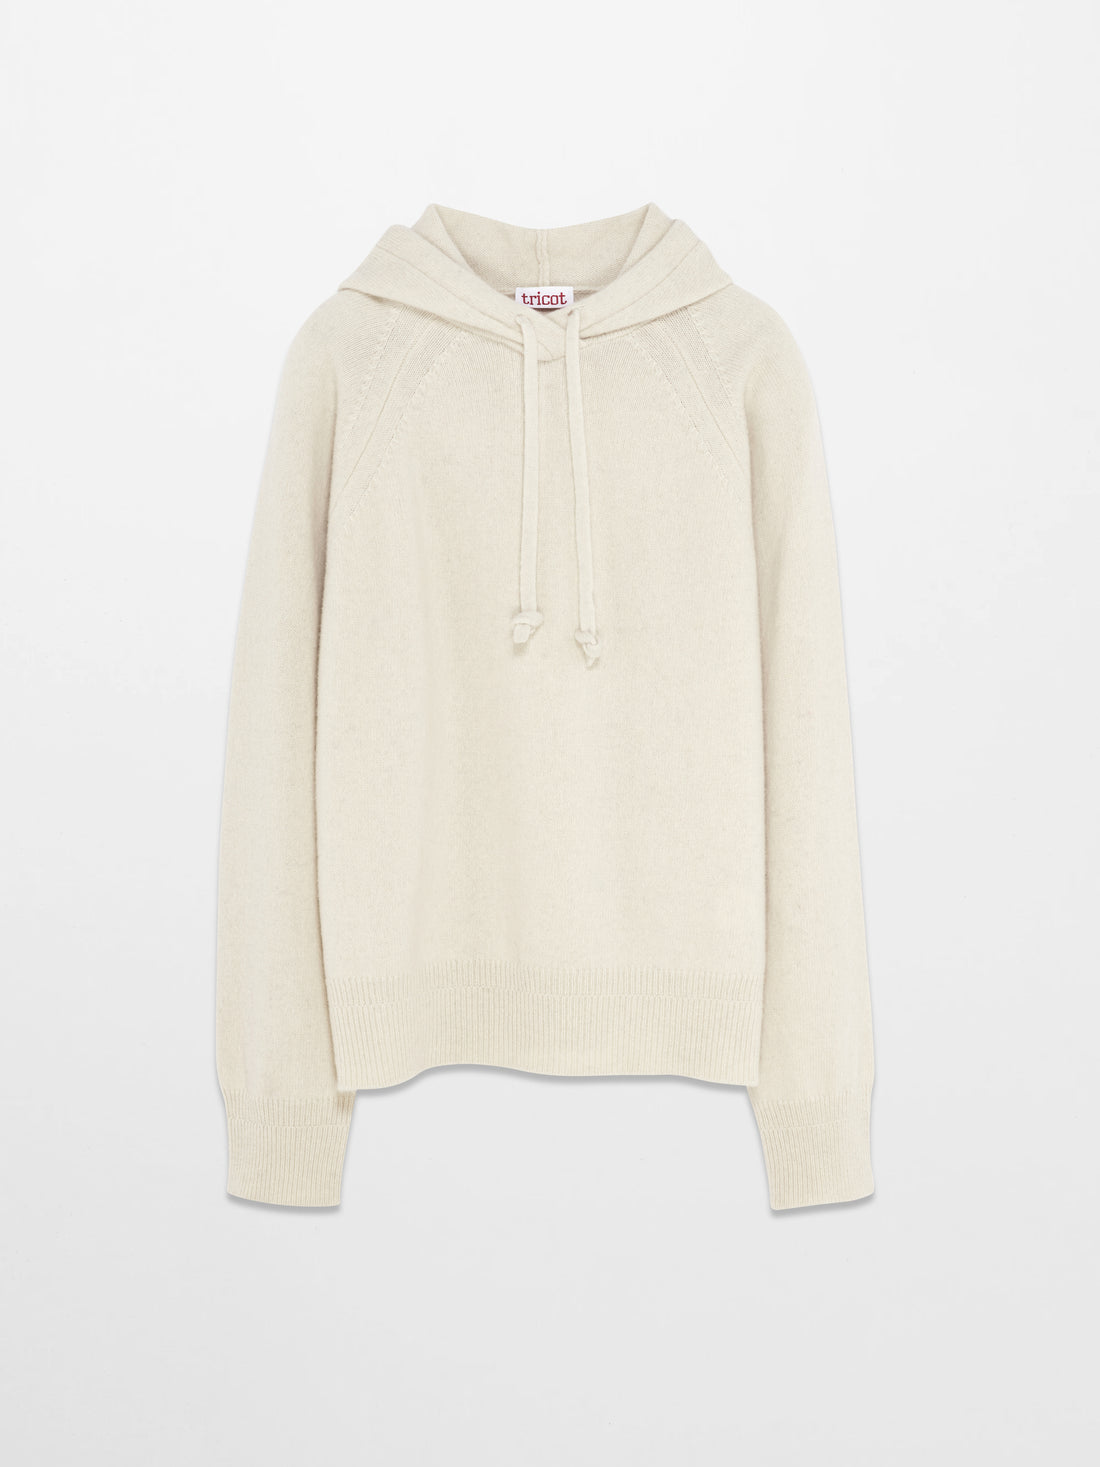 Women’s Off White Recycled Cashmere & Wool Hoodie